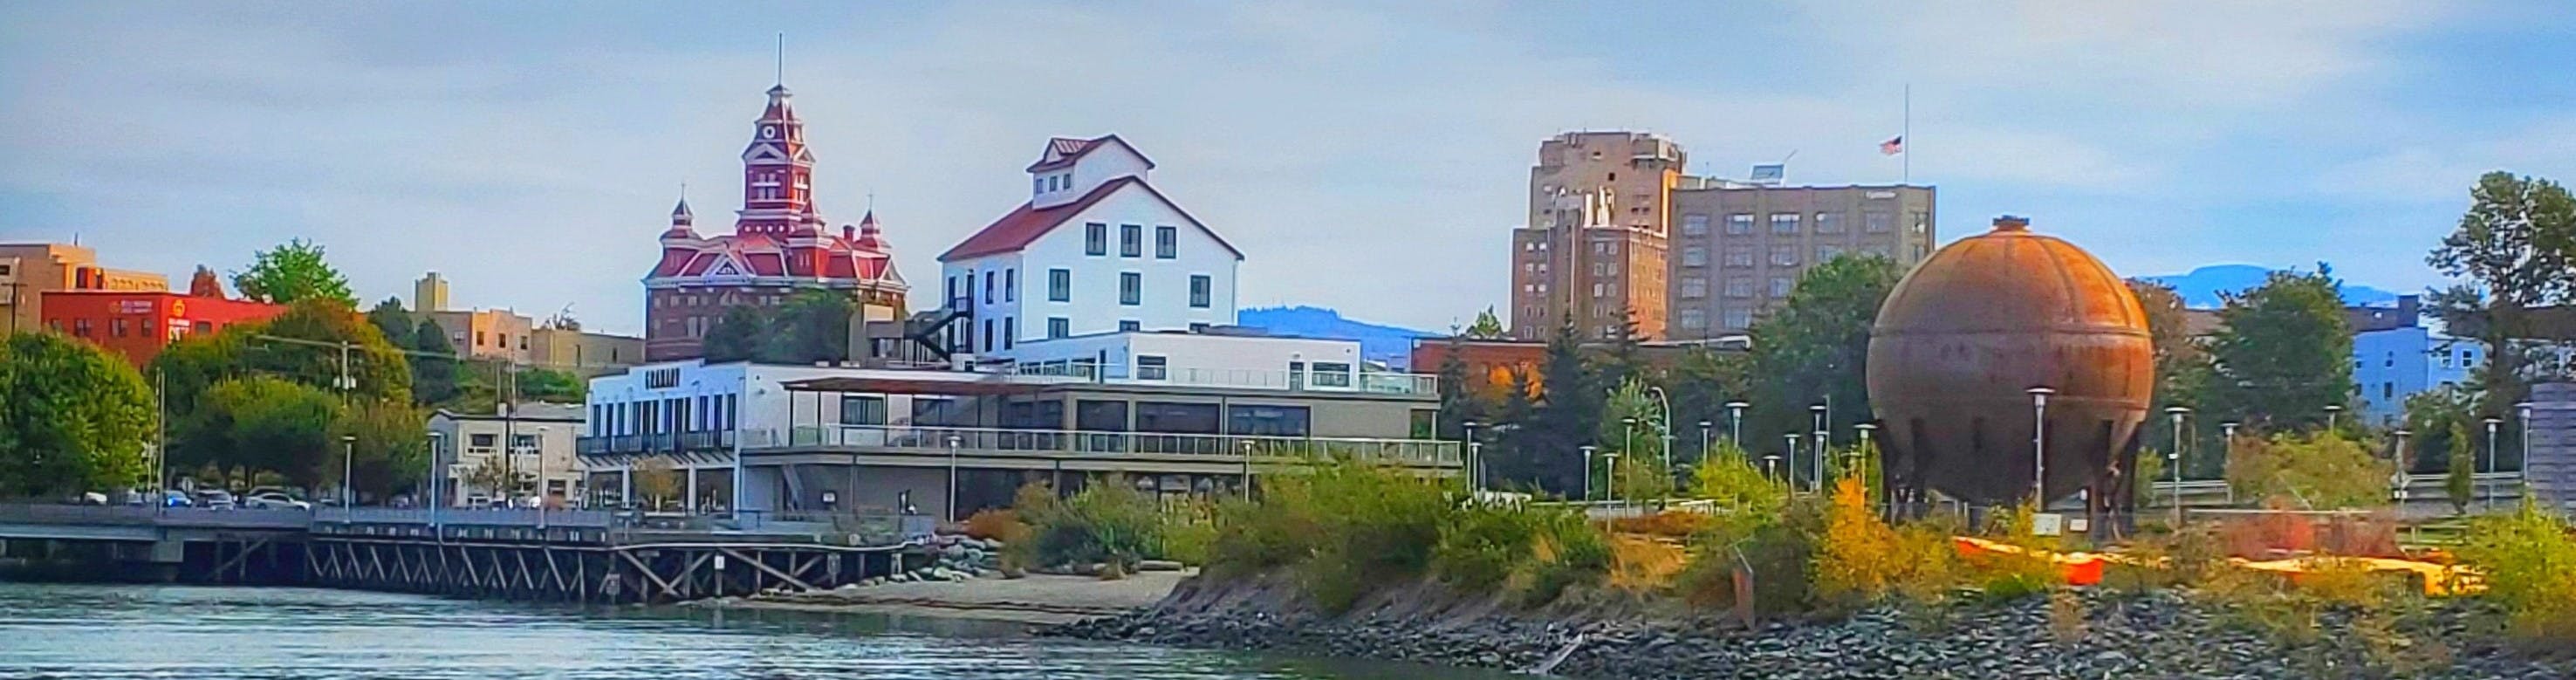 View of Bellingham Waterfront District from the water